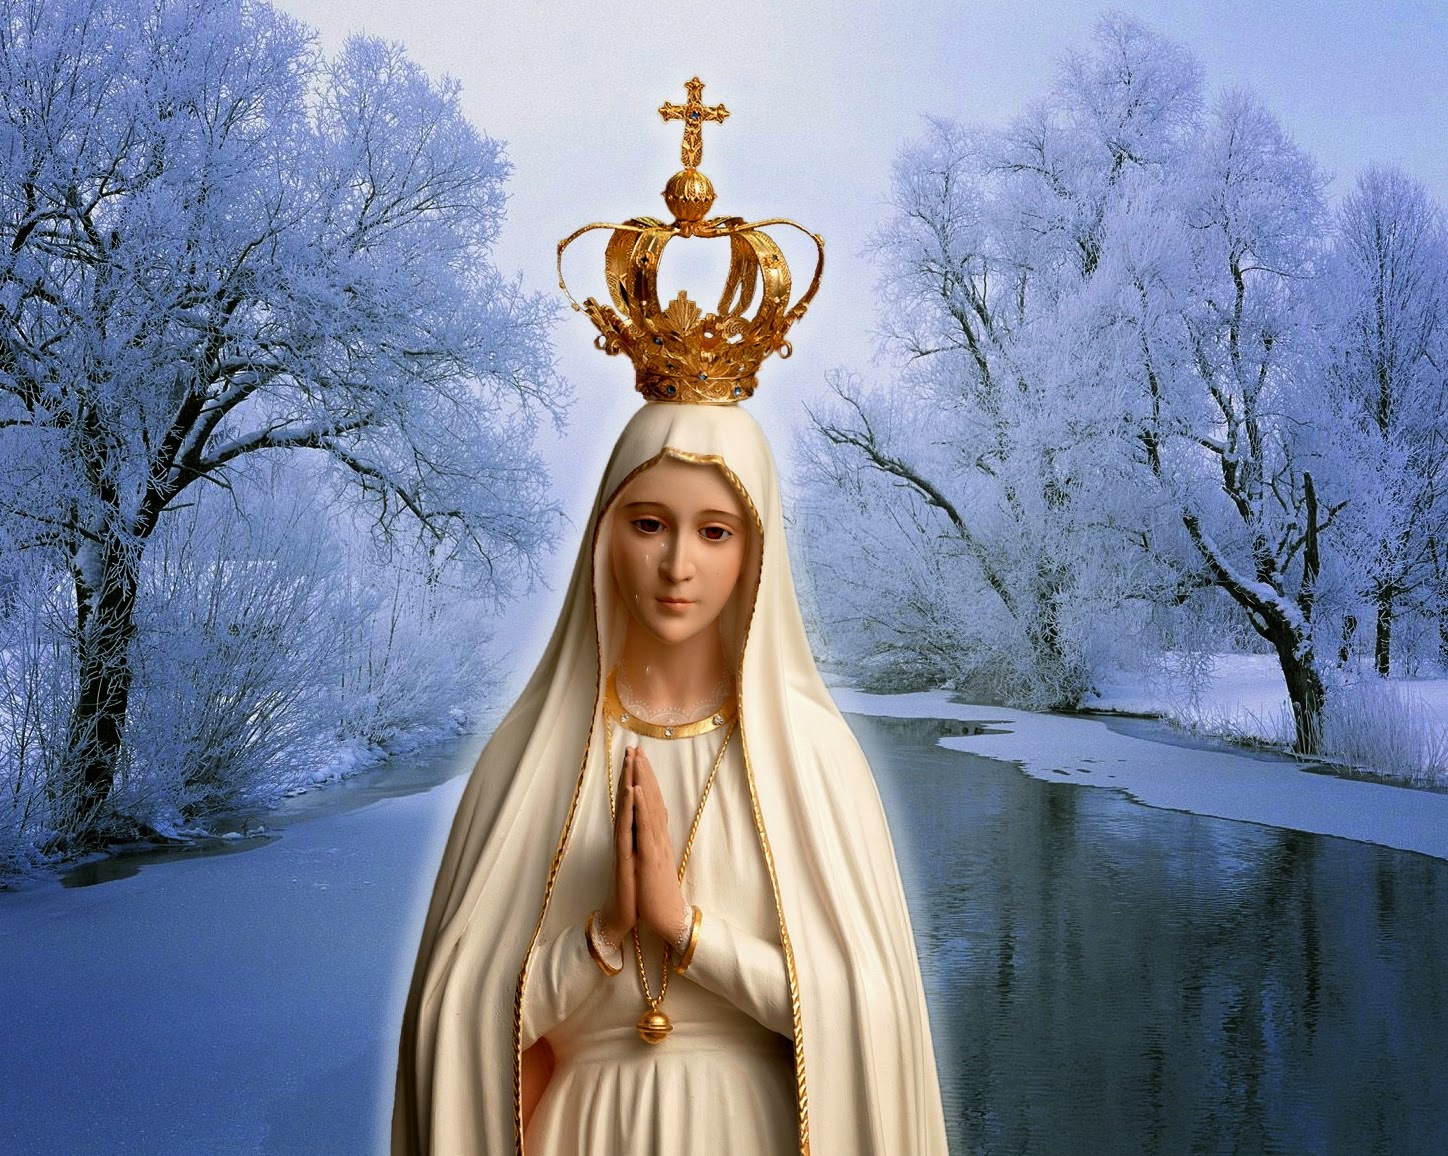 Our Lady of Fatima. 